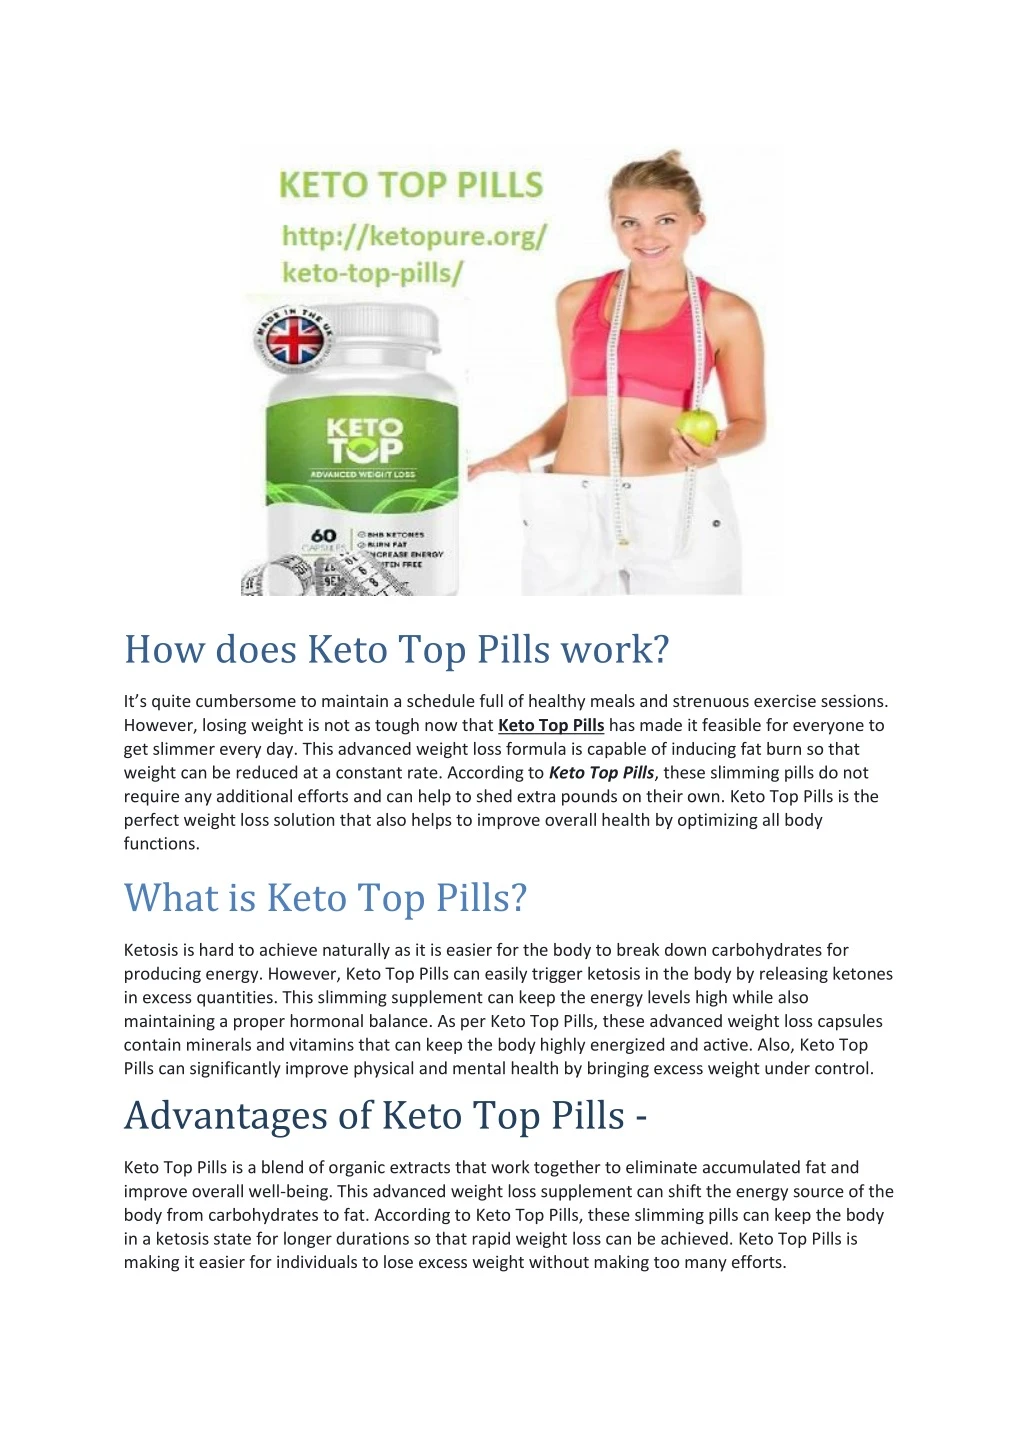 how does keto top pills work